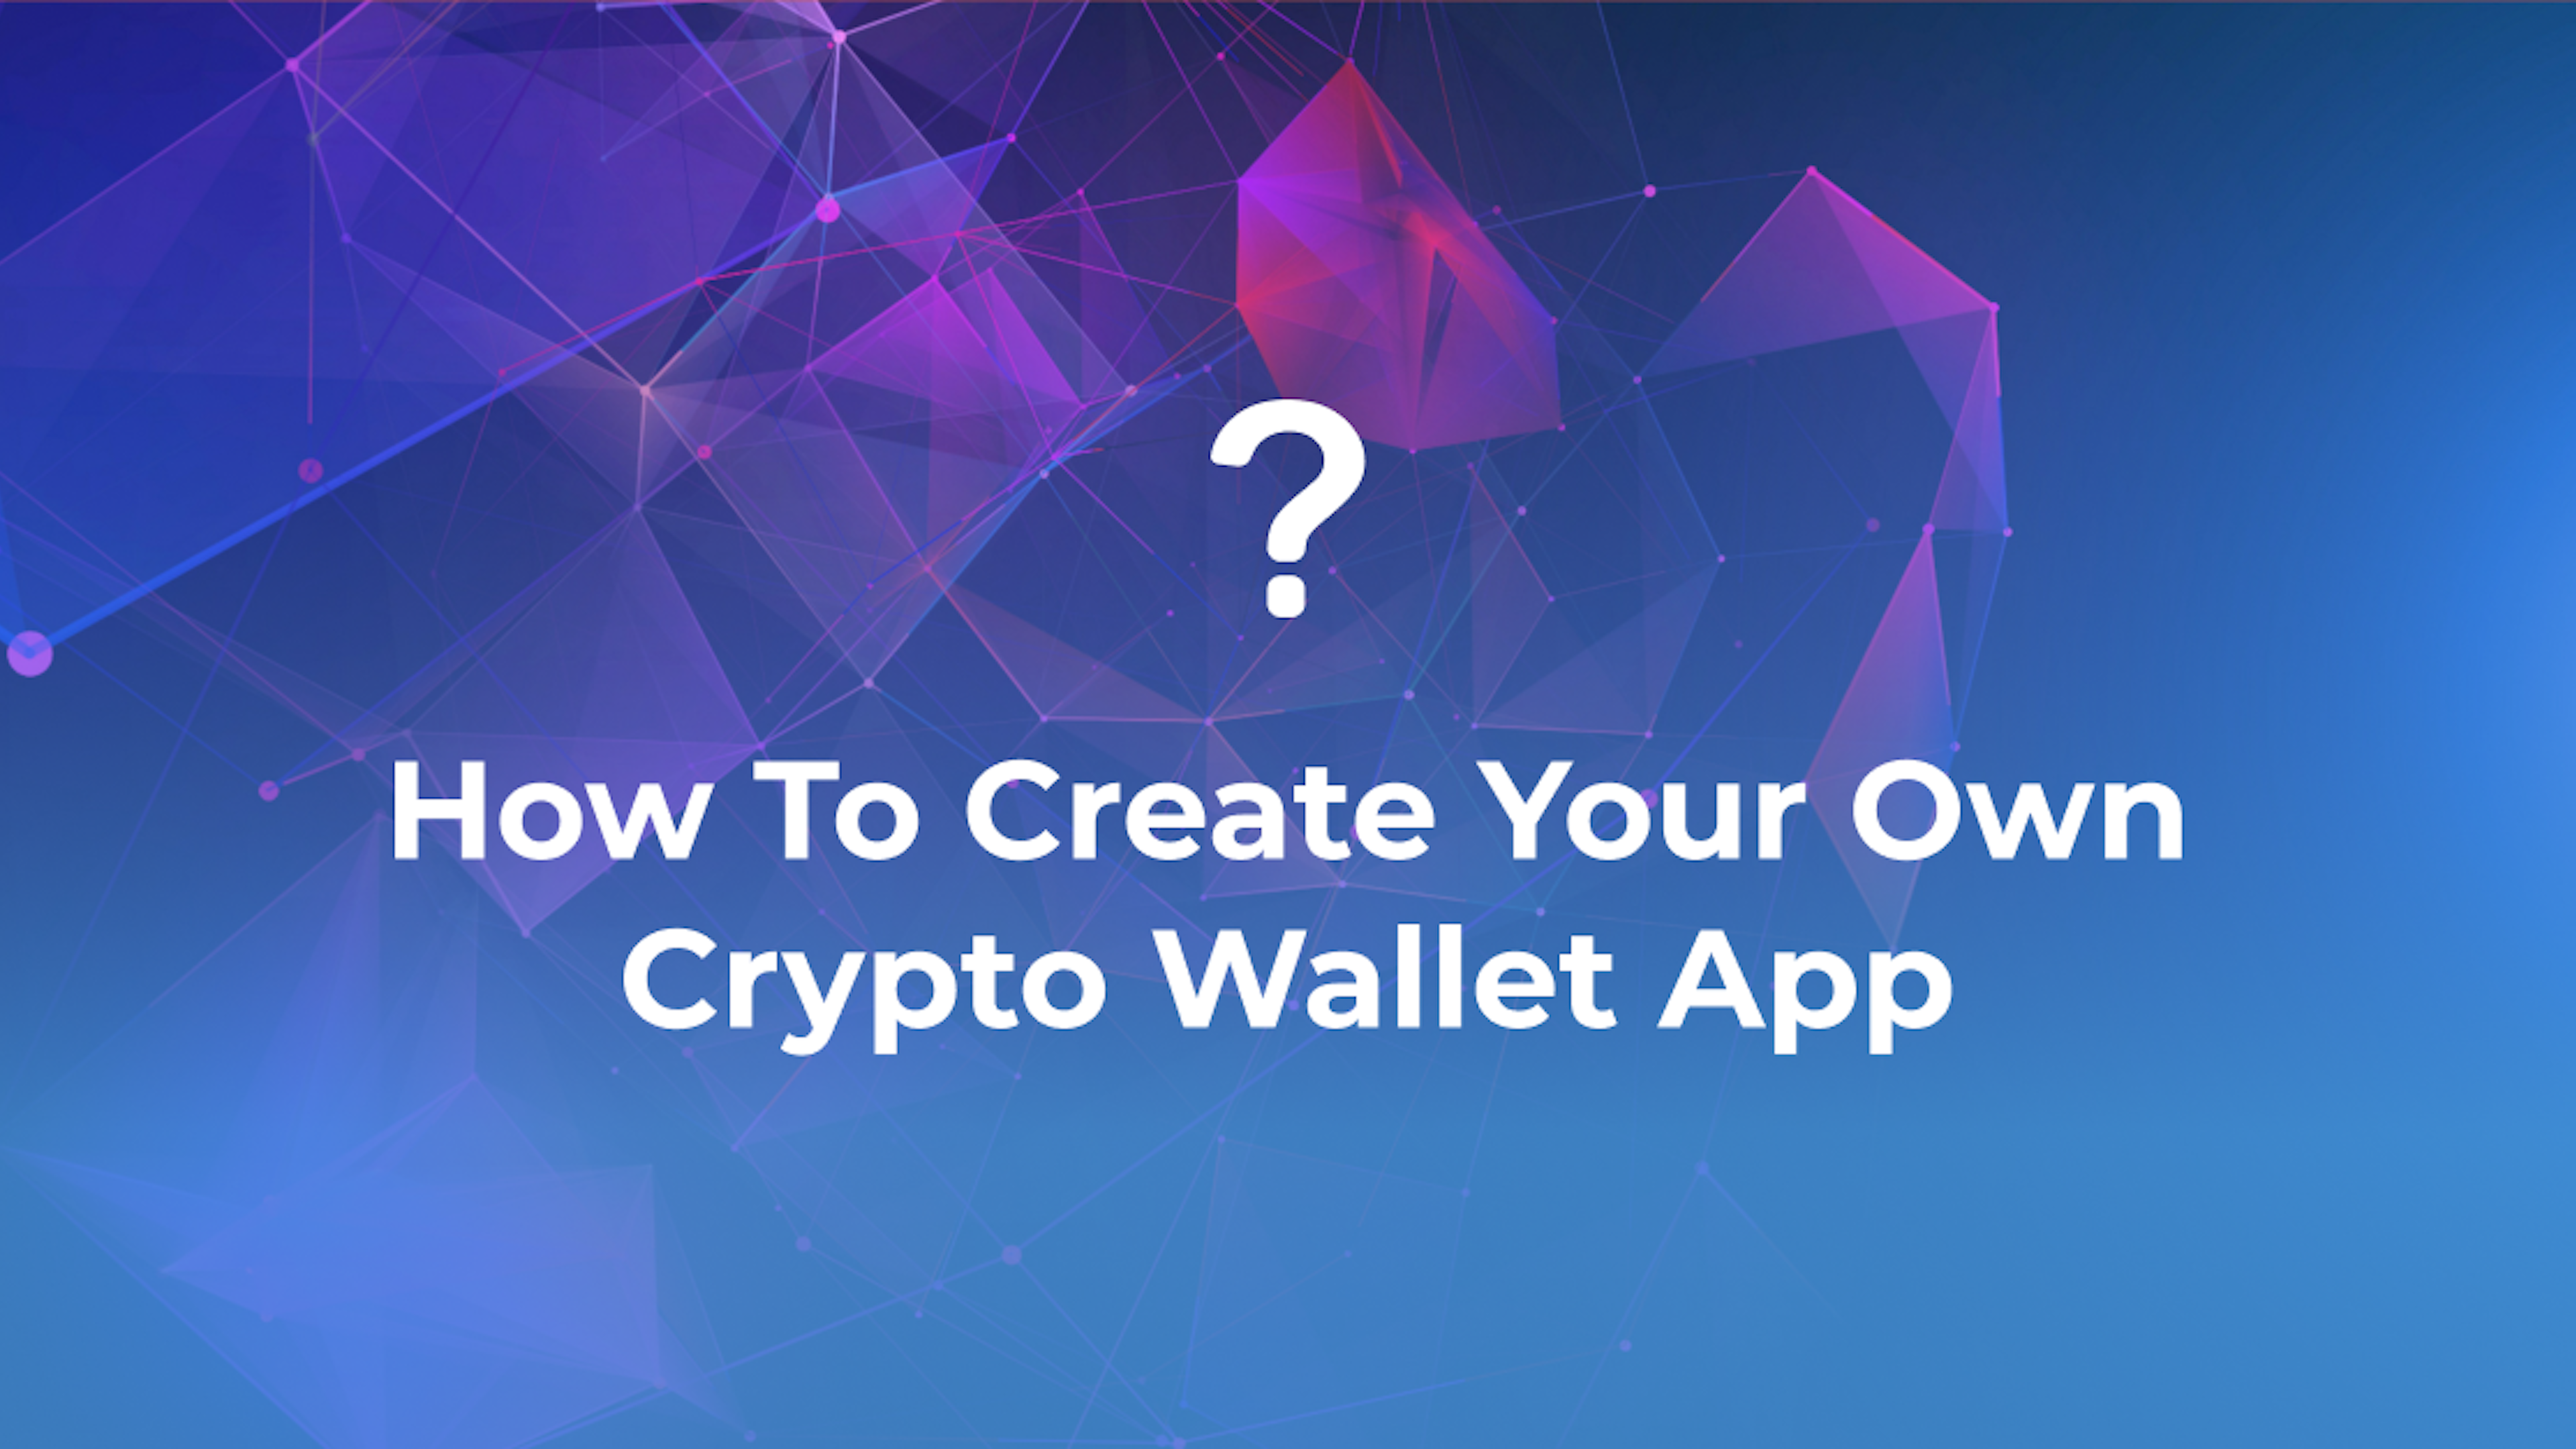 How To Create Your Own Crypto Wallet App | Easy Guide